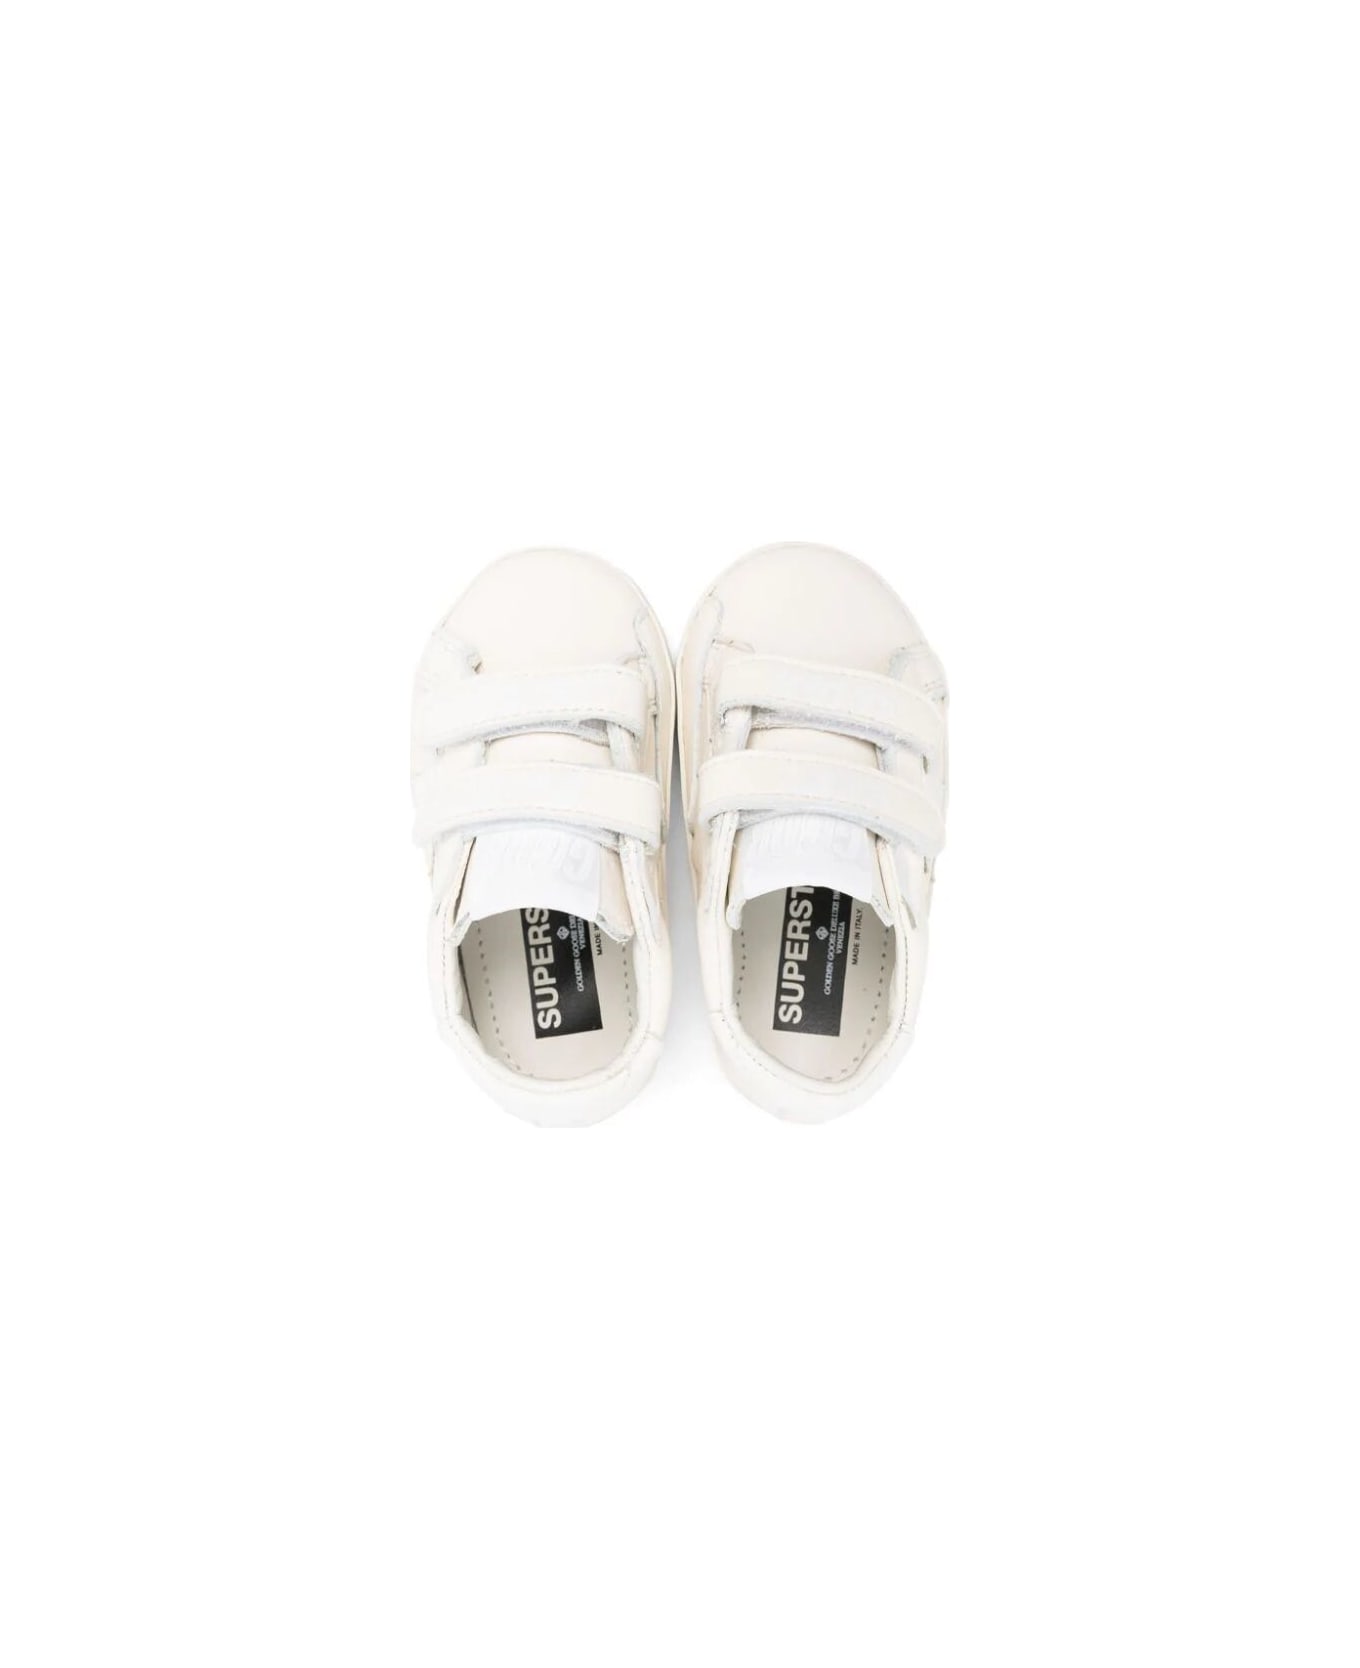 Golden Goose Baby School Nappa Upper Leather Star And Heel - Optic White